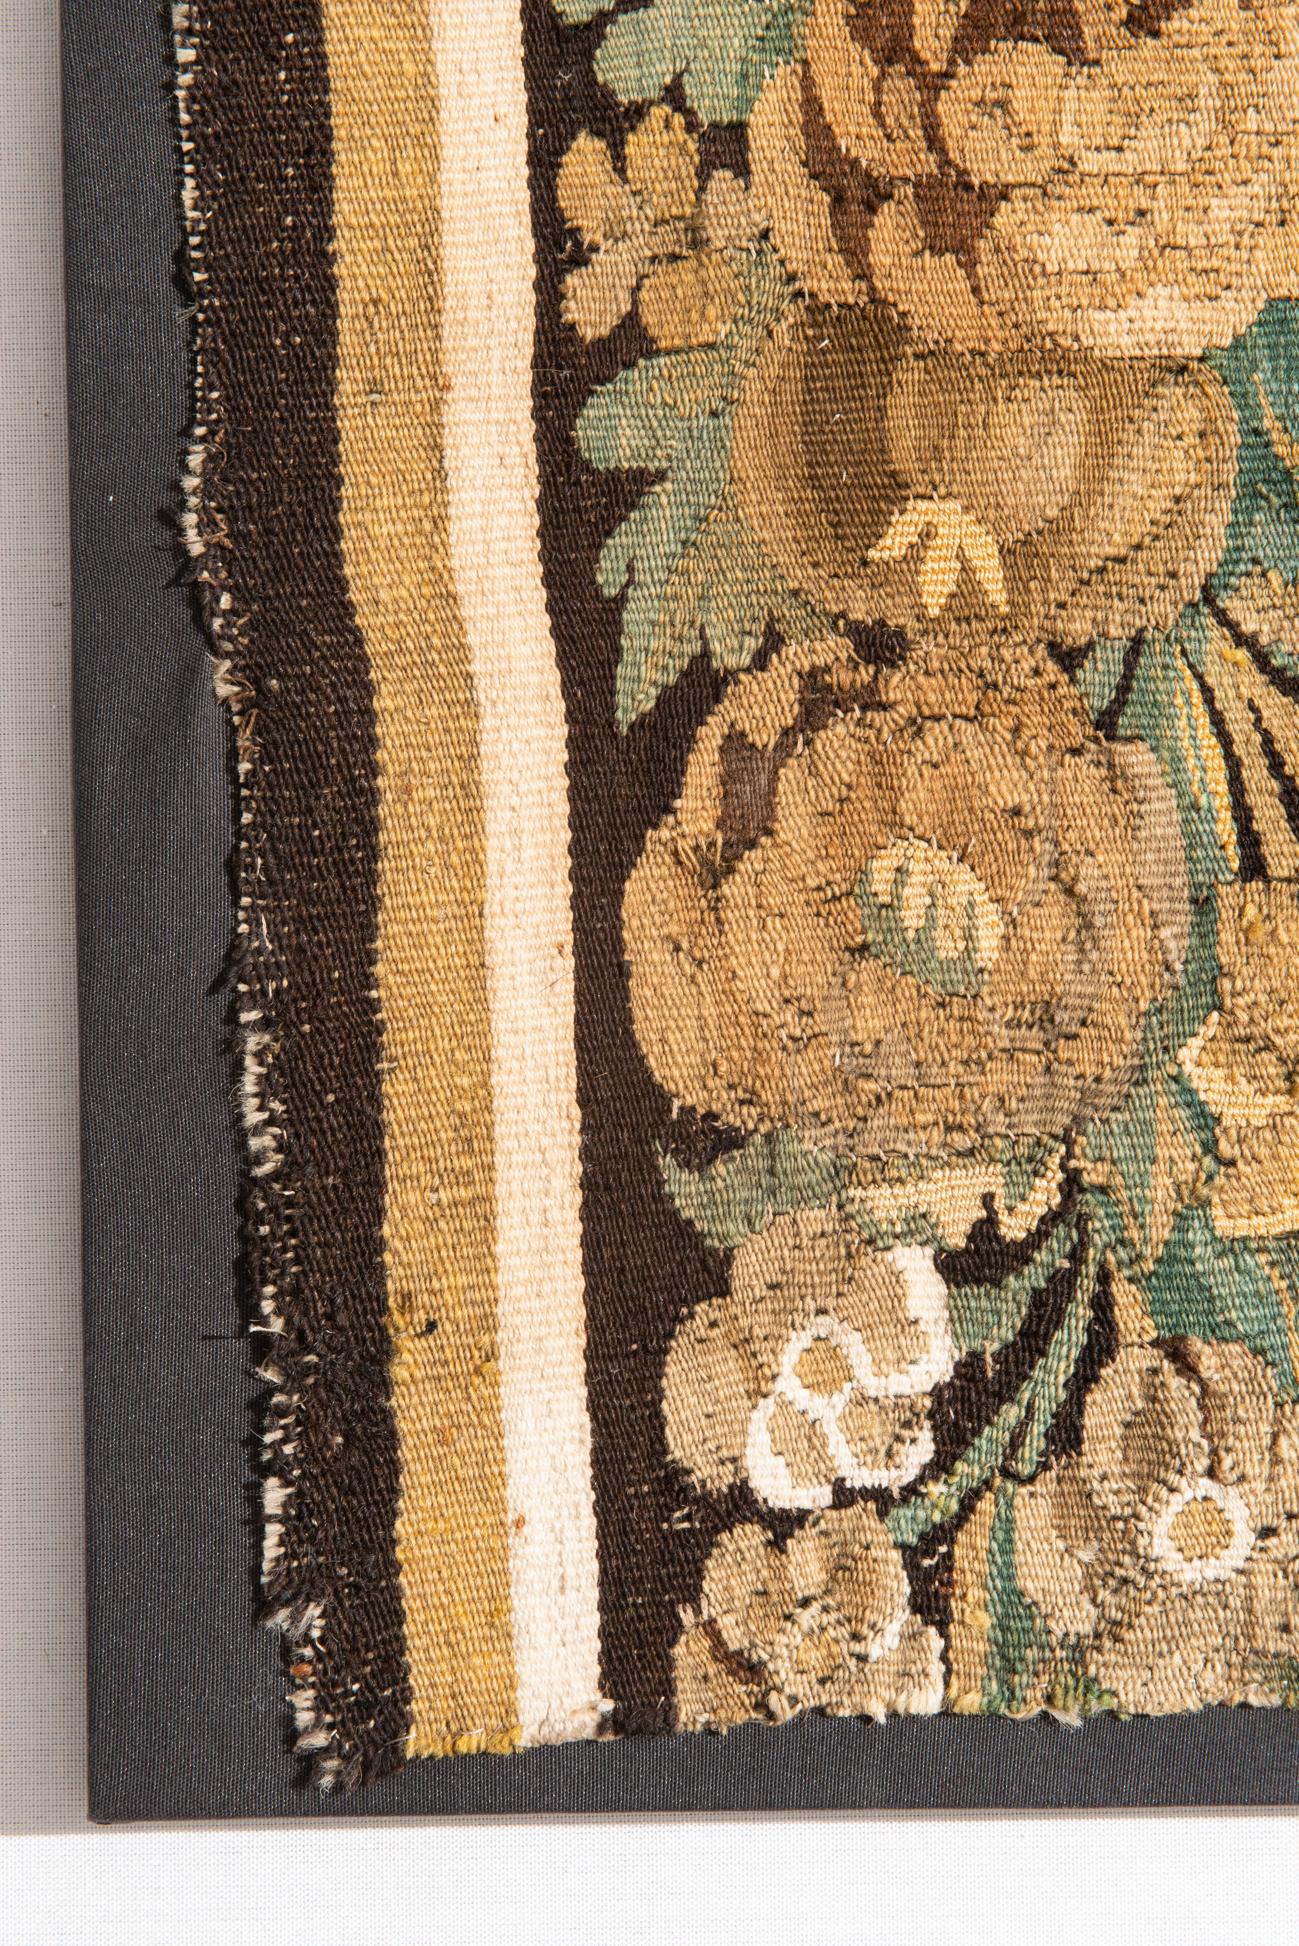 Hand-Woven Flemish Tapestry Fragment For Sale